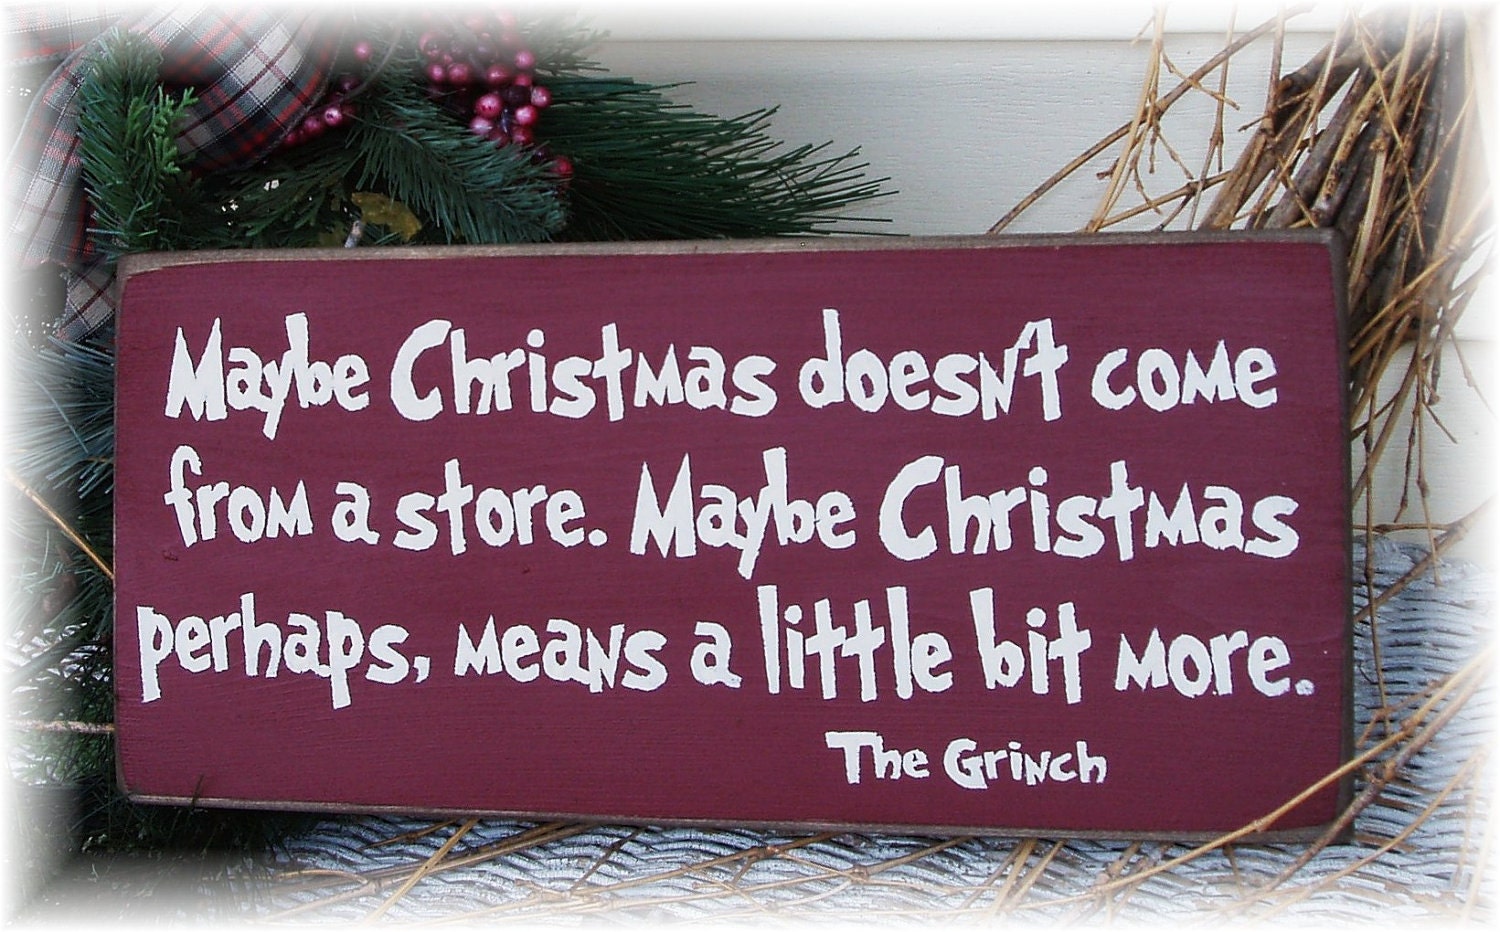 Maybe Christmas doesn't come from a store... by woodsignsbypatti